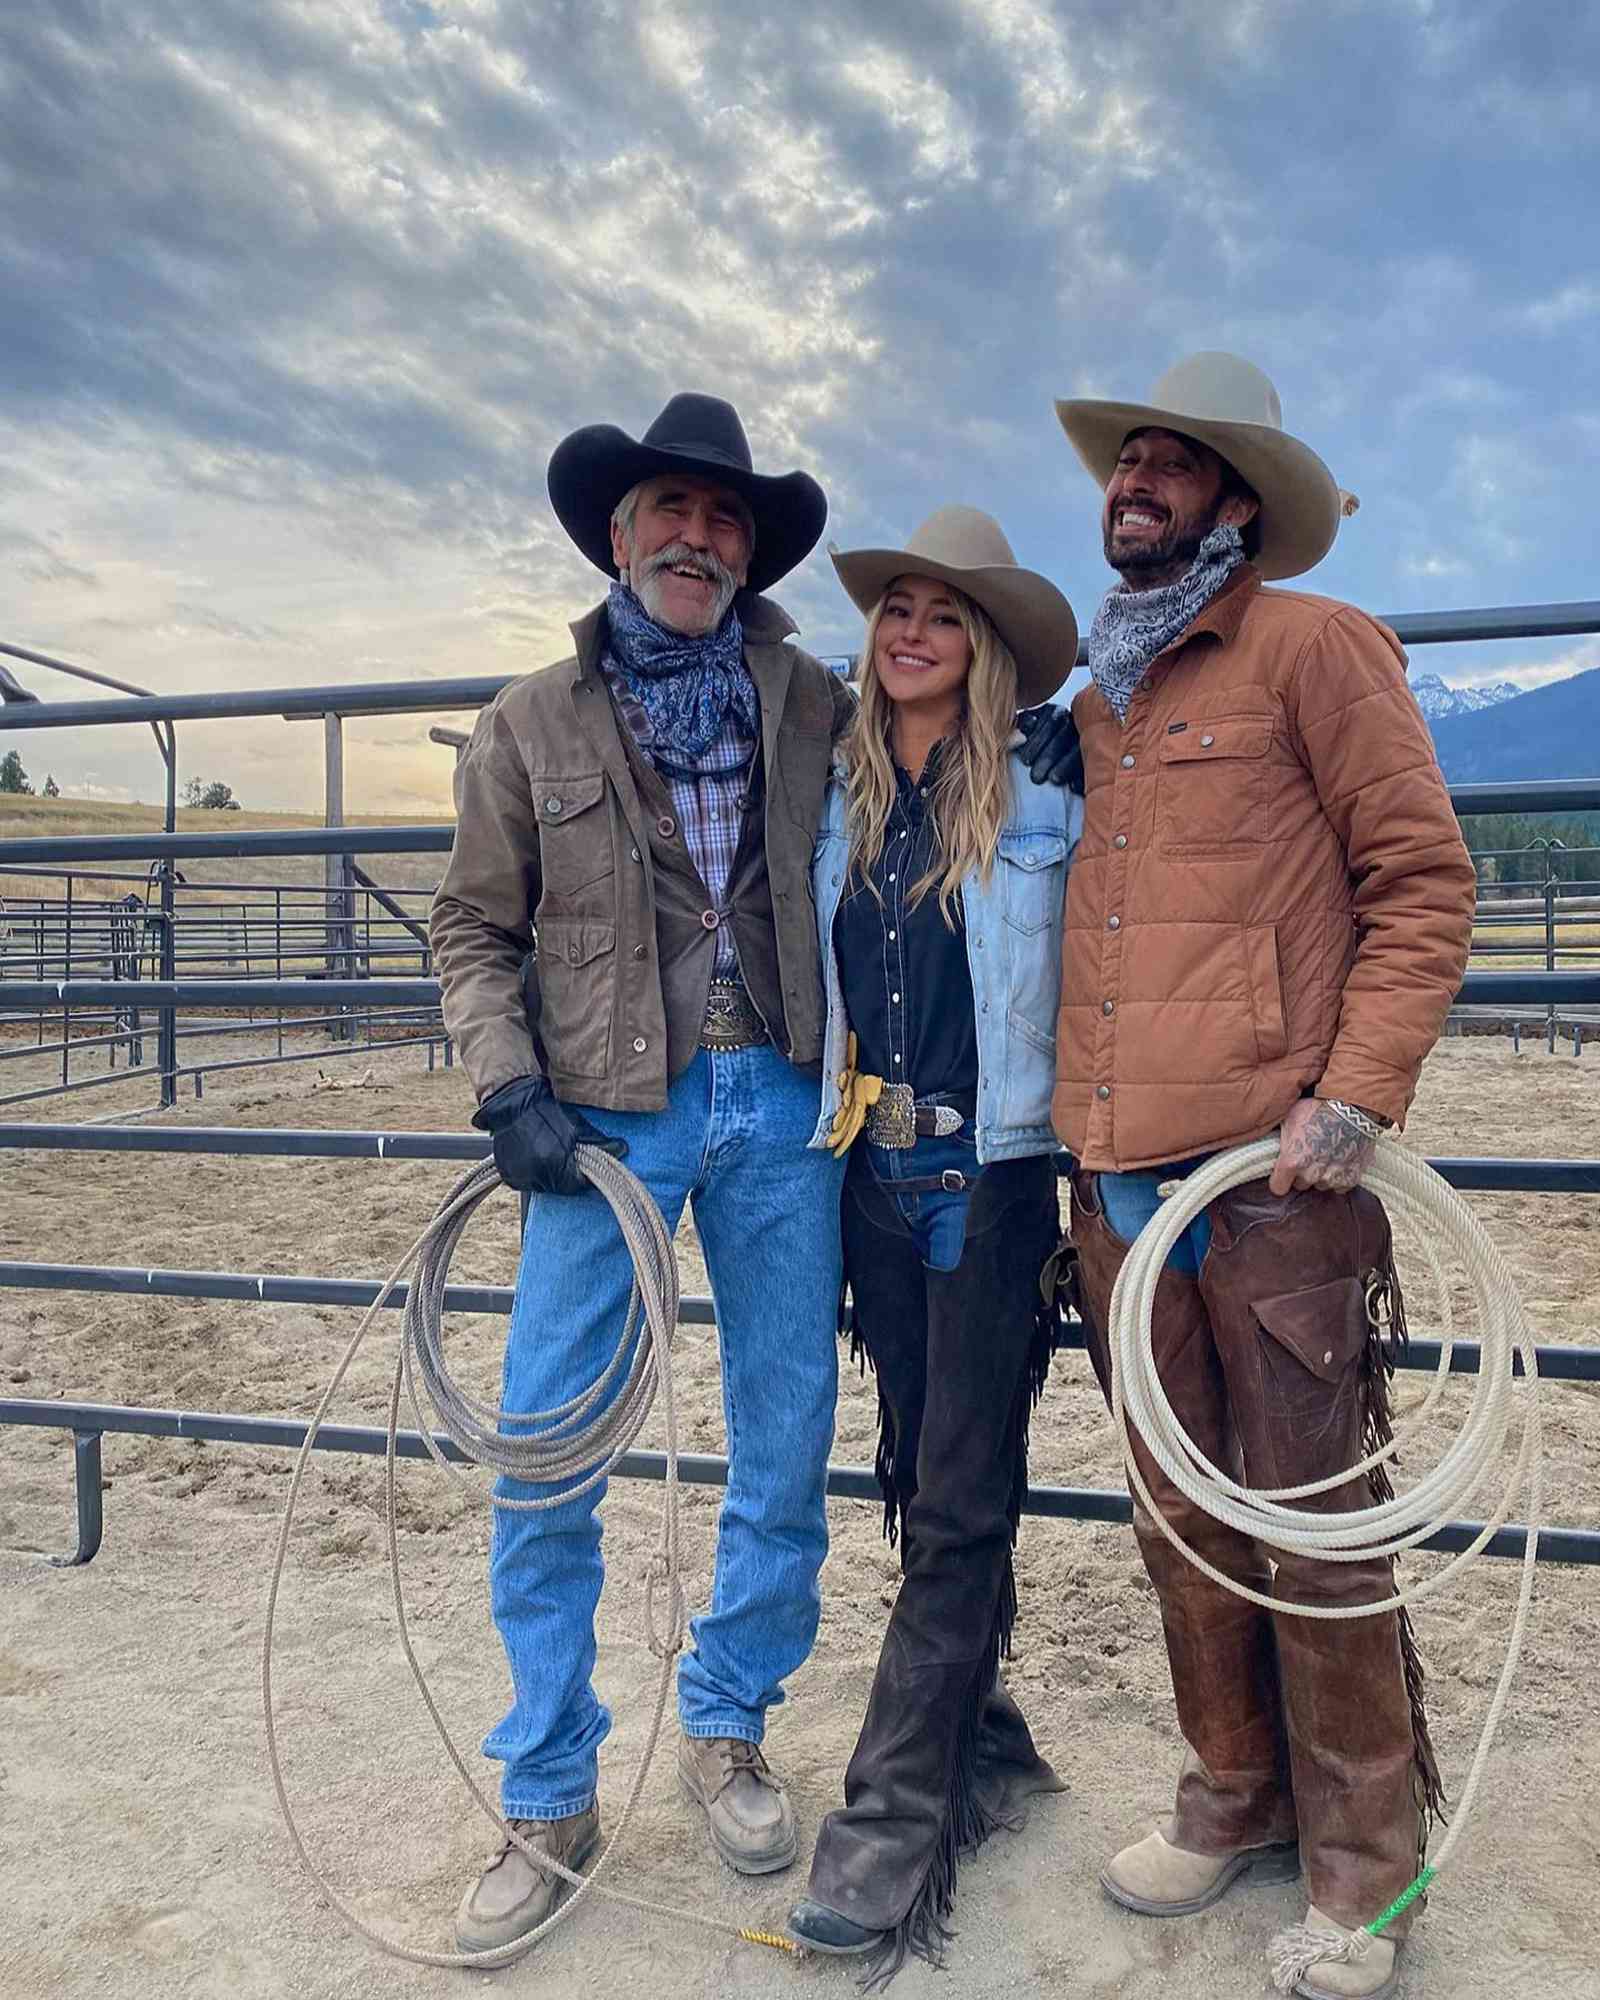 Forrie J. Smith, Hassie Harrison, and Ryan Bingham on the set of 'Yellowstone'.